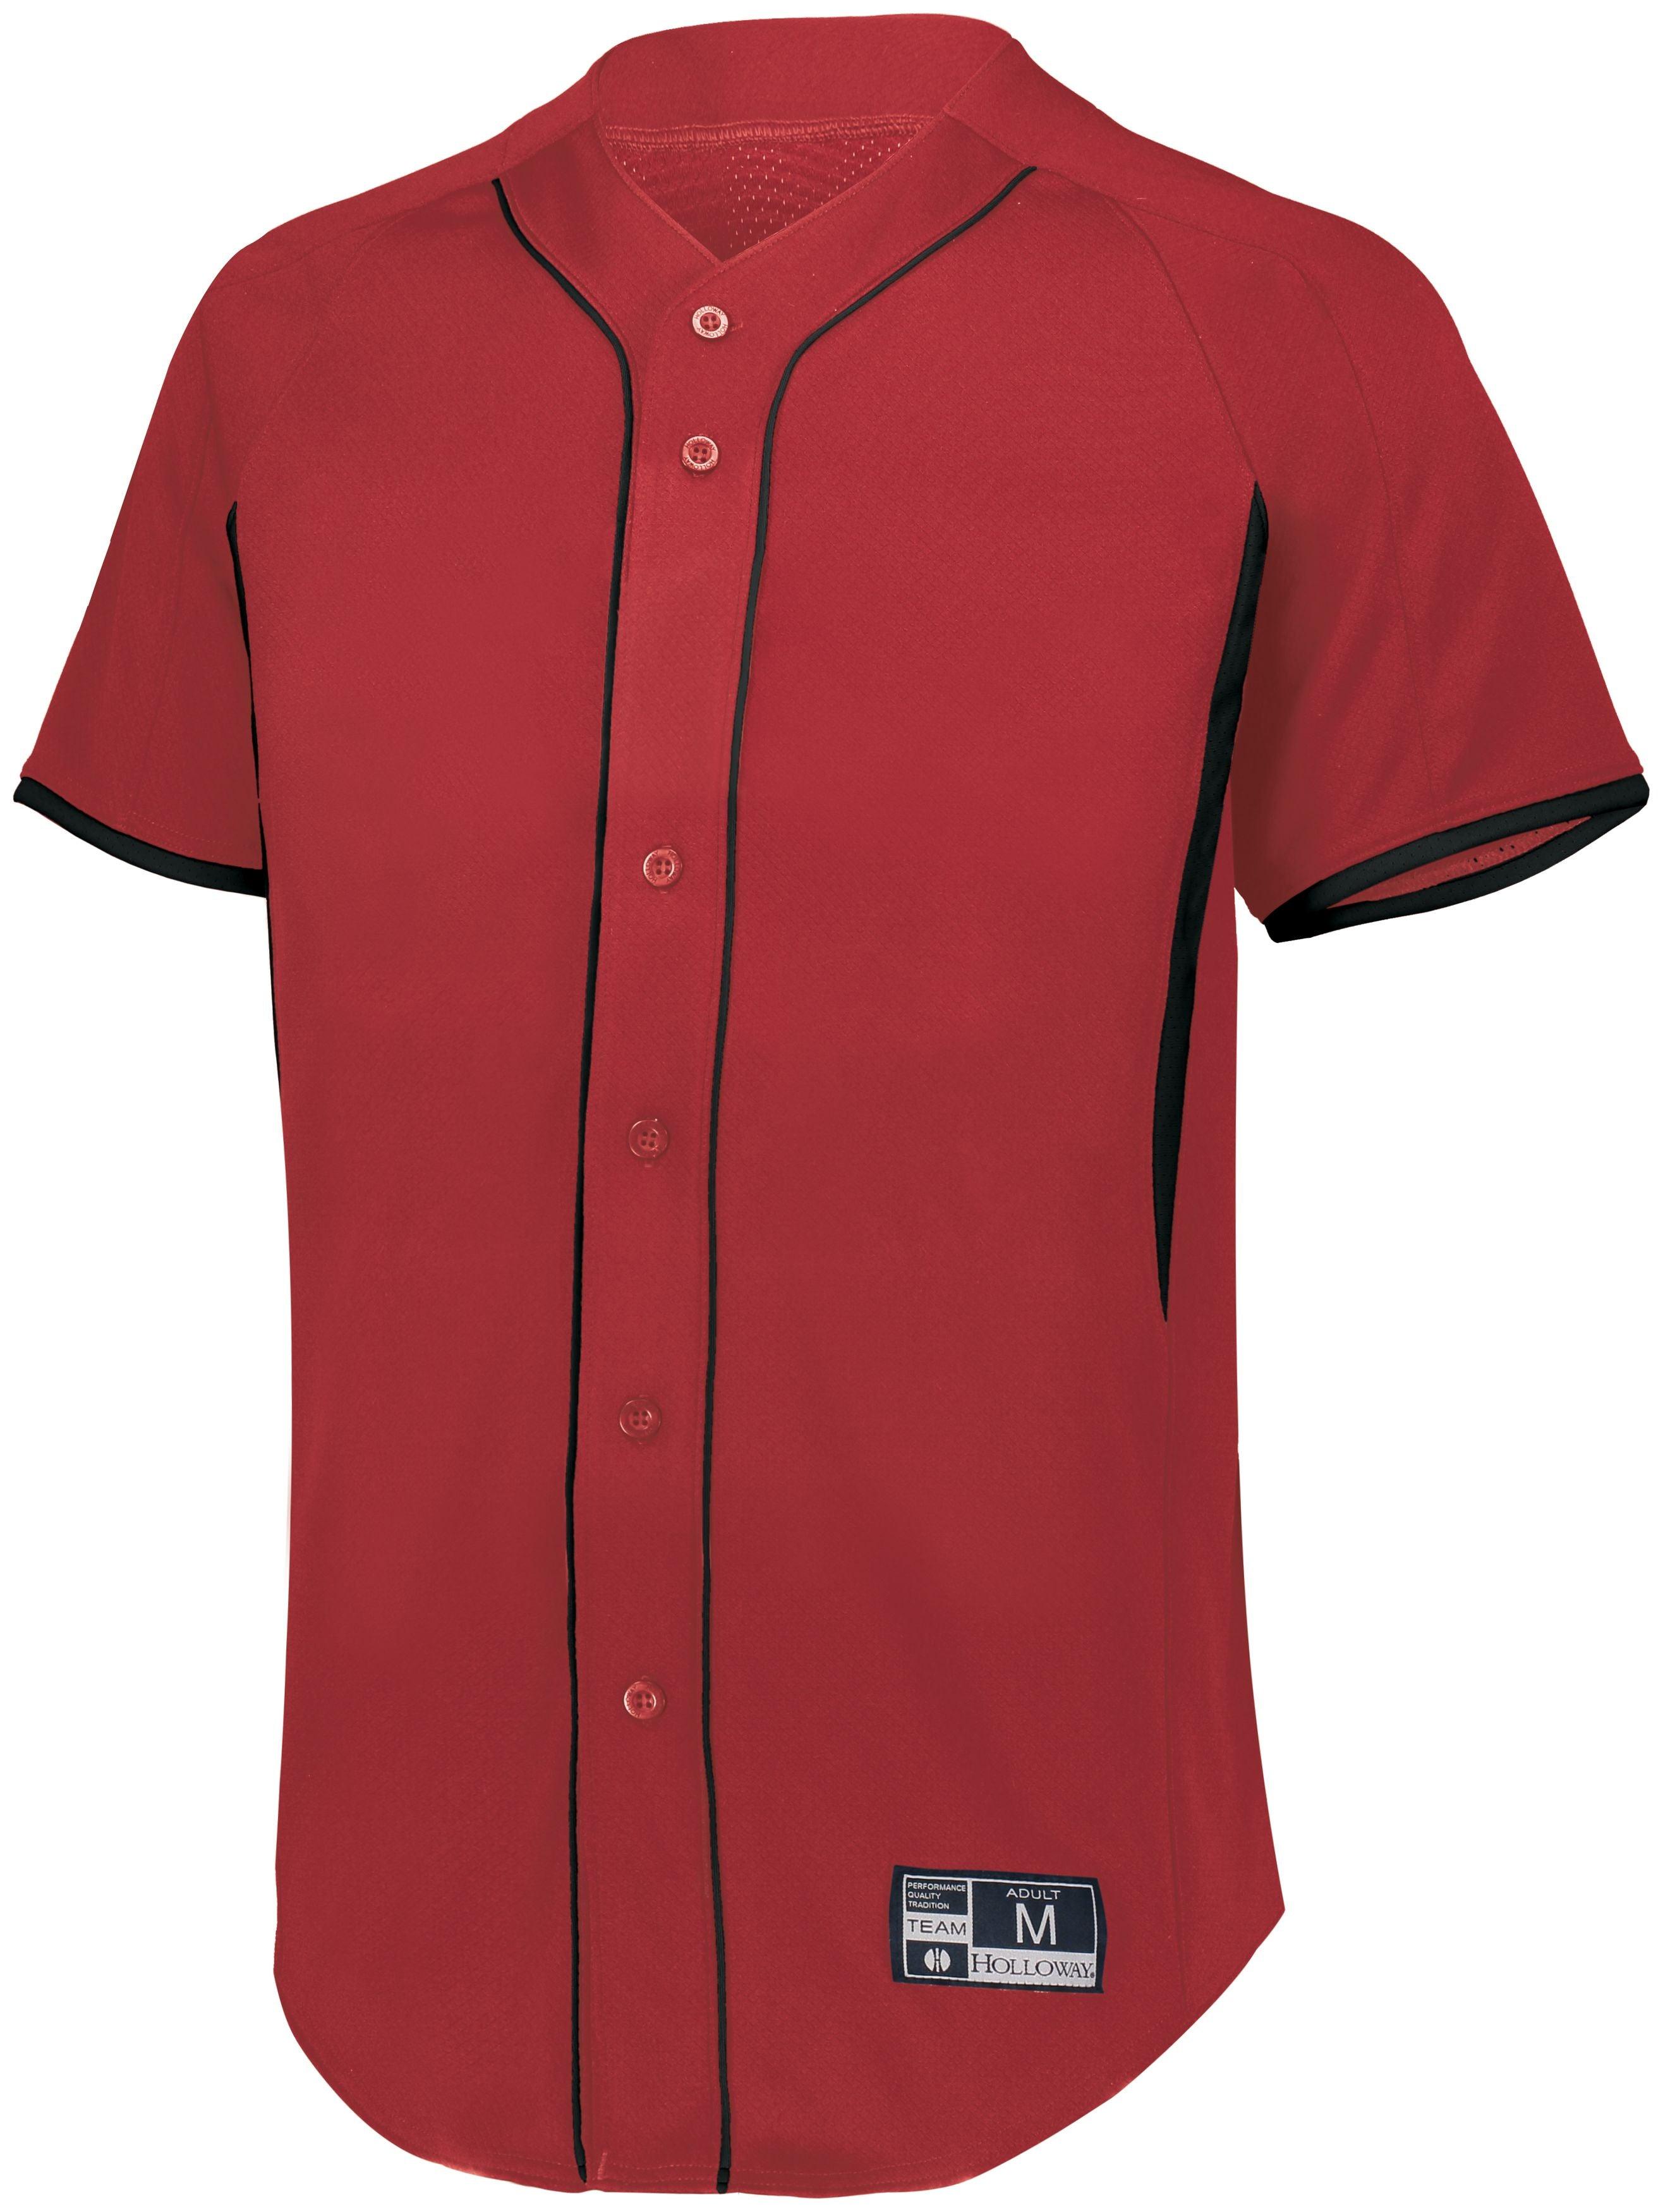 Game7 Full-Button Baseball Jersey - Dresses Max